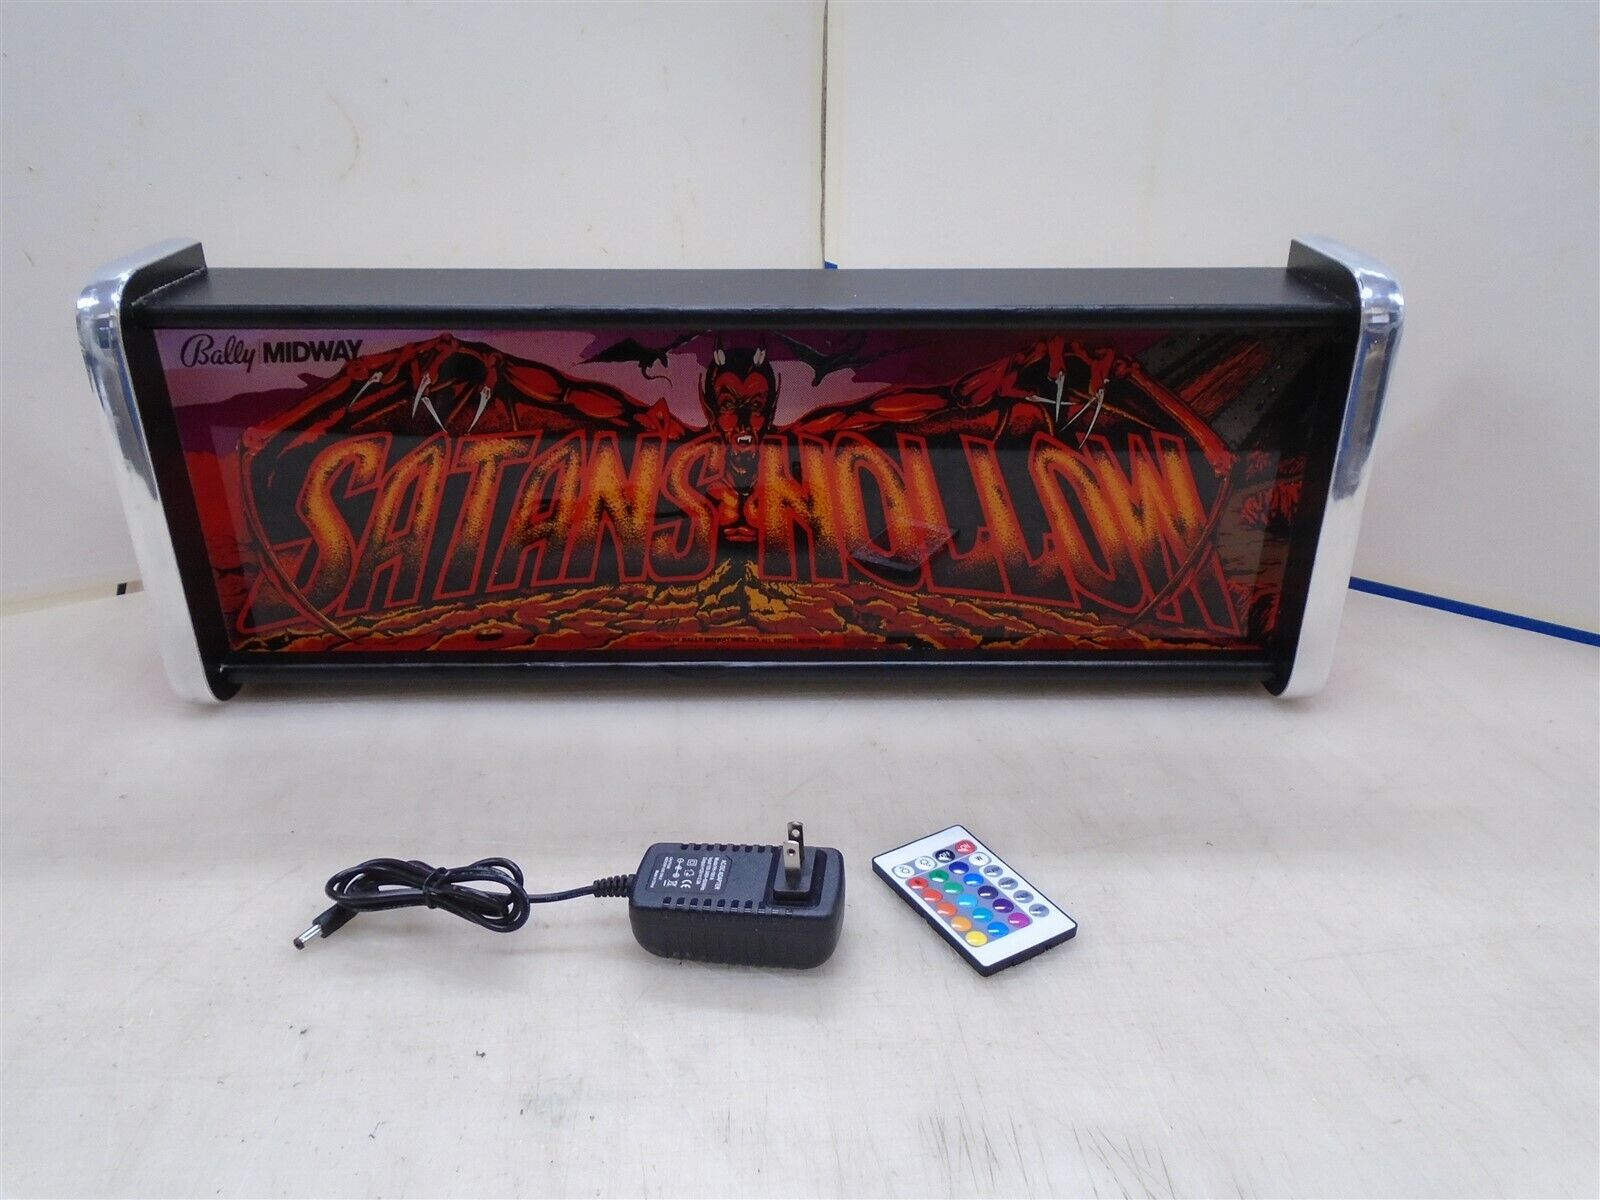 Satan's Hollow Marquee Game/Rec Room LED Display light box